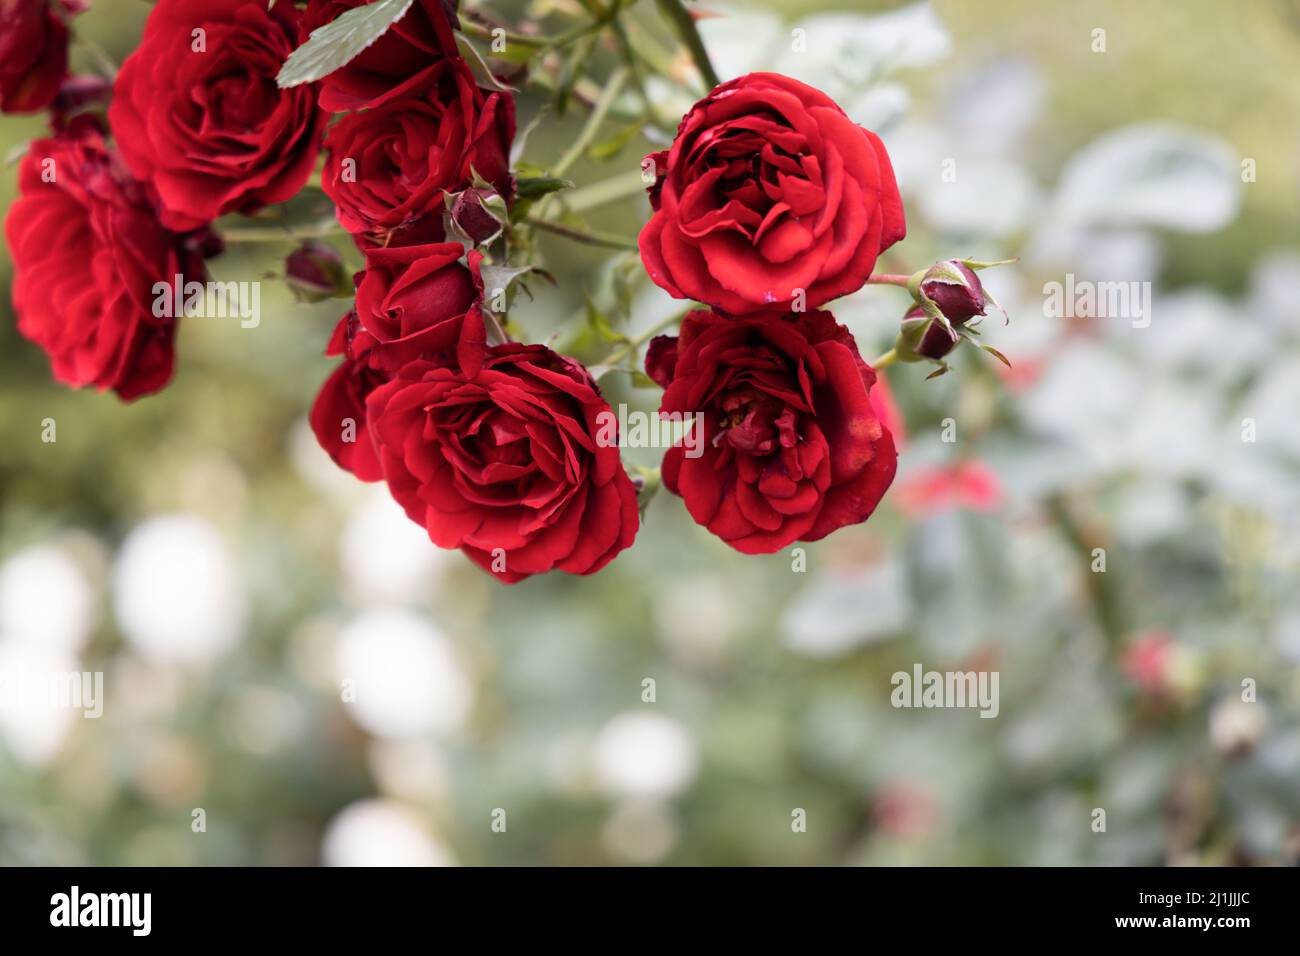 Blooming scarlet rosebuds close-up on a blurry background with white petals Stock Photo